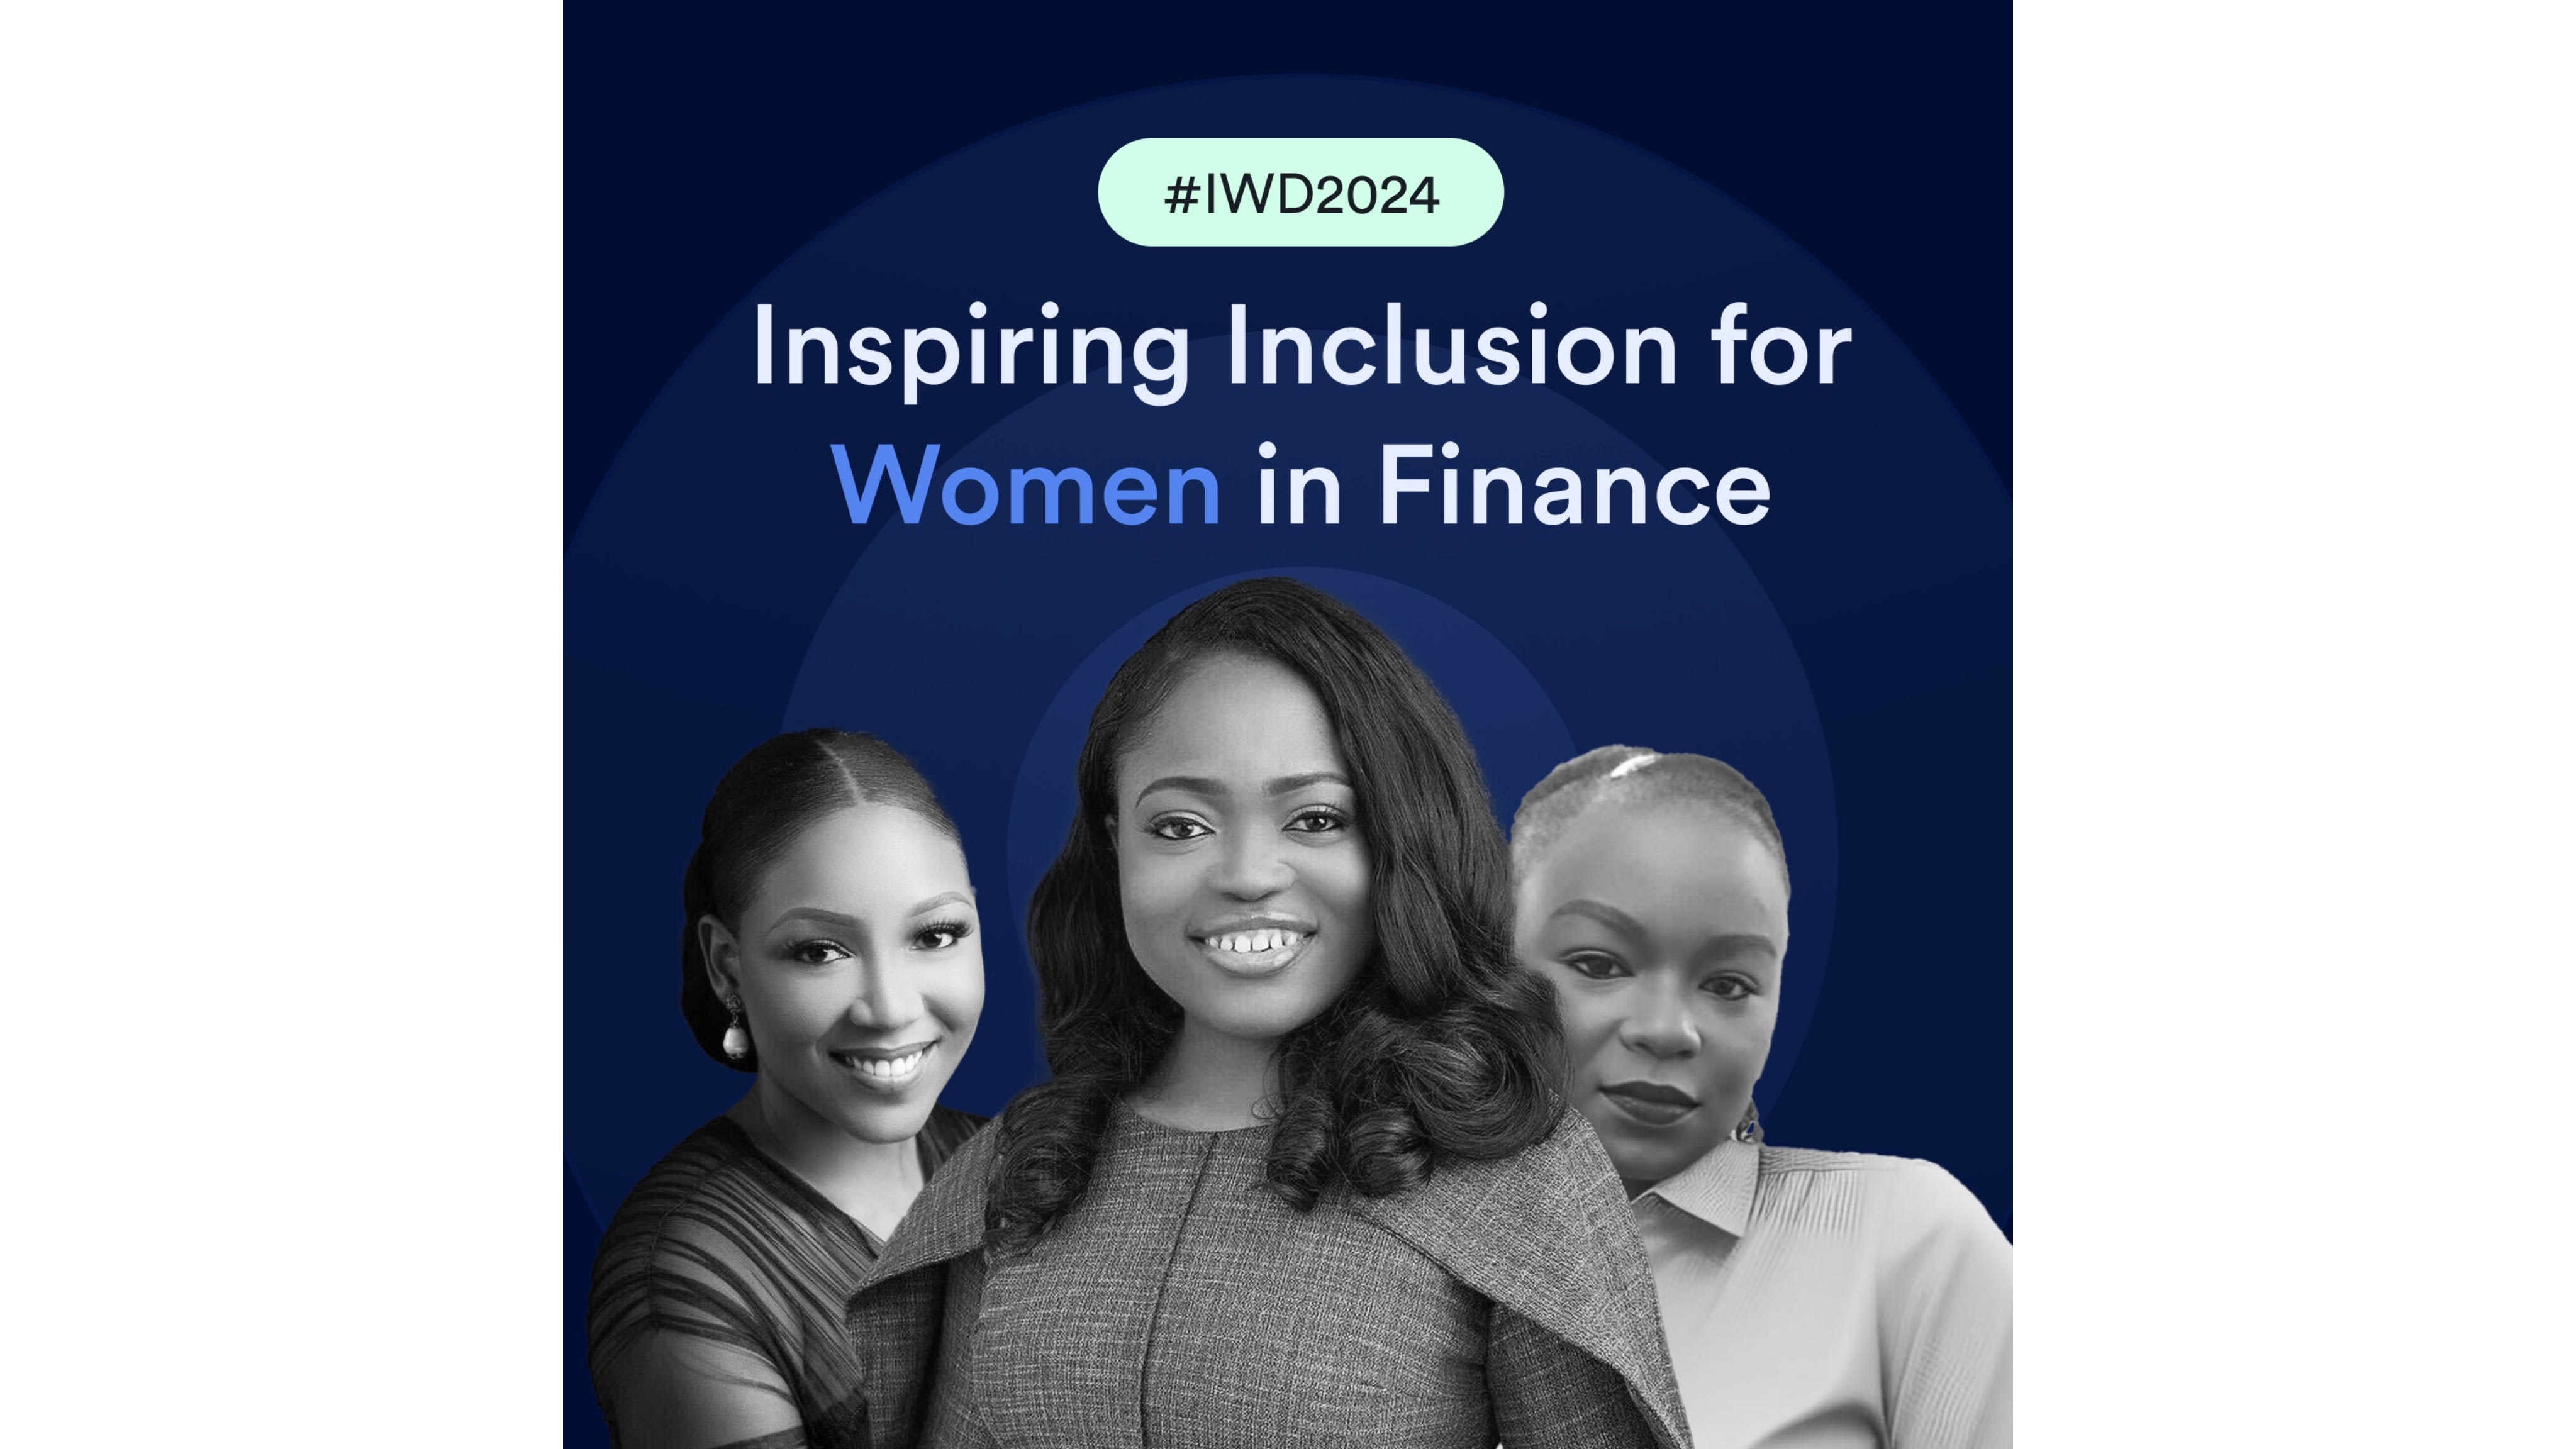 #IWD2024: Inspiring Inclusion for Women in Finance